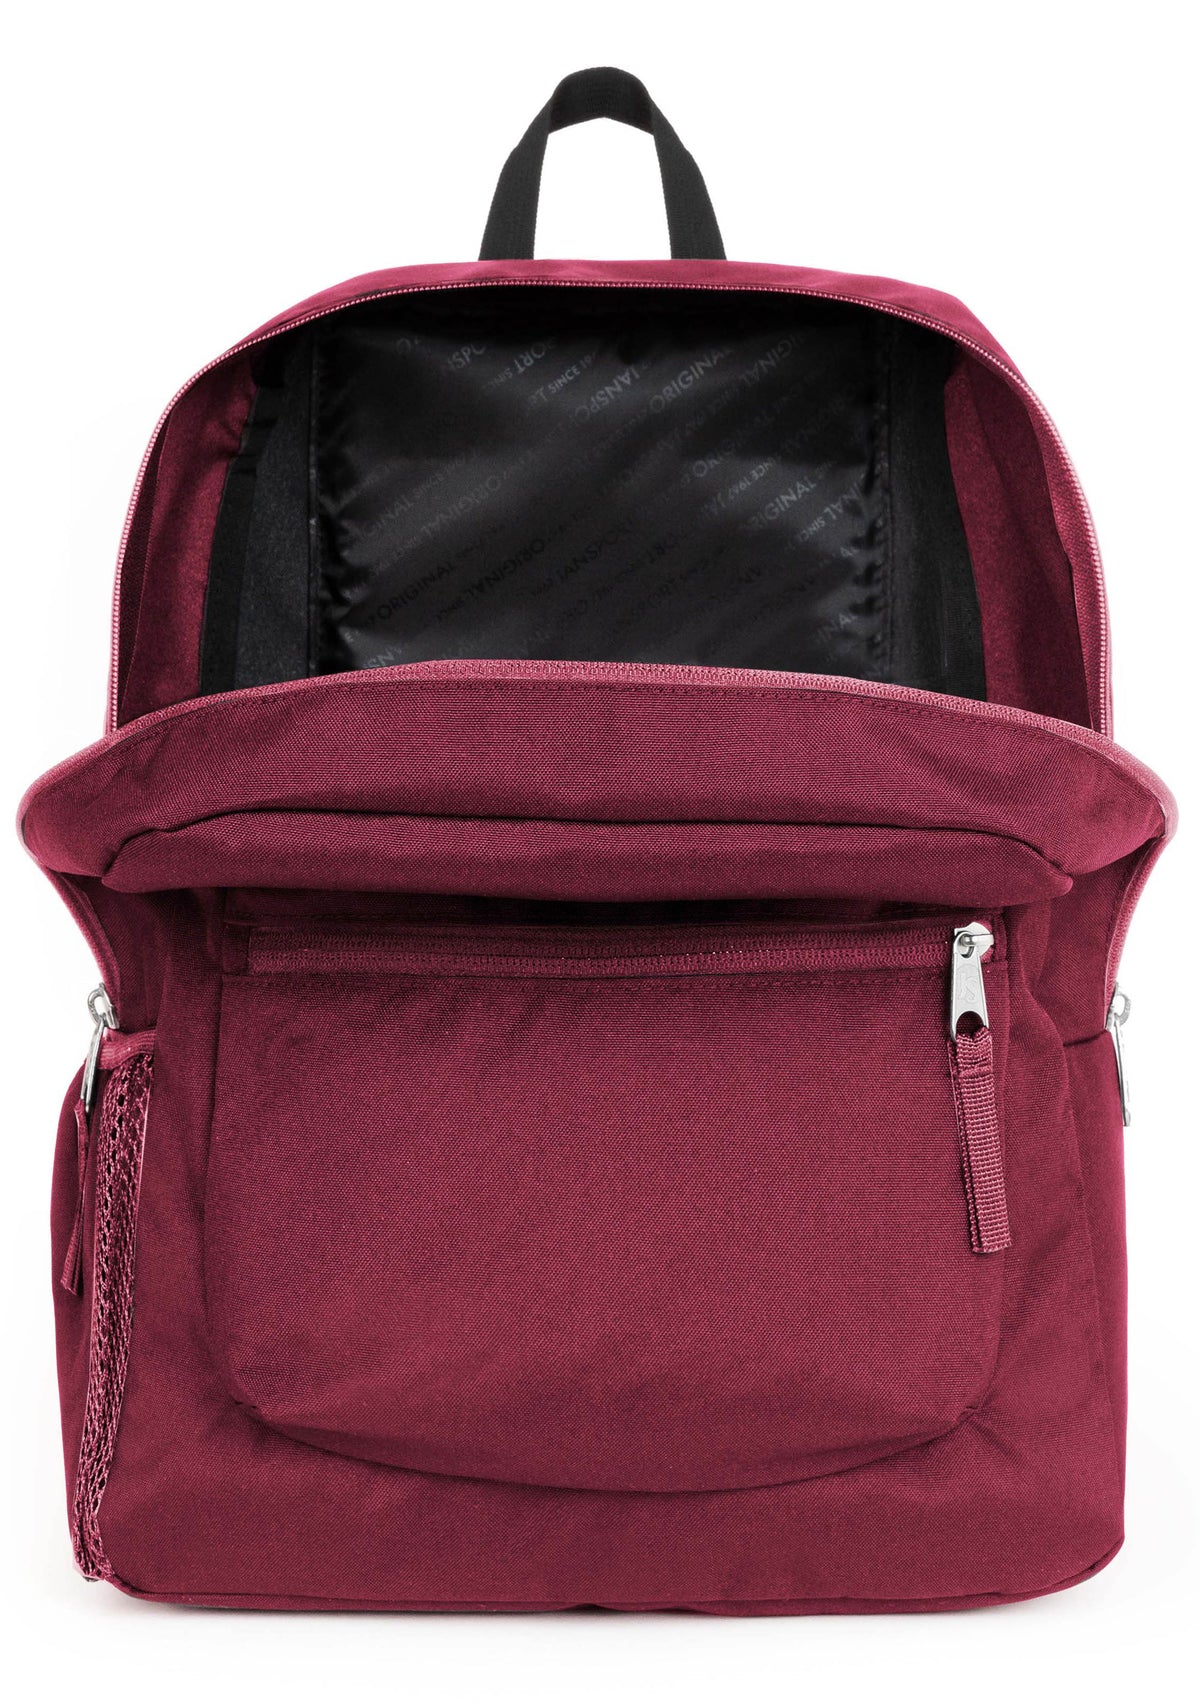 Jansport Cross Town Backpack - Russet Red